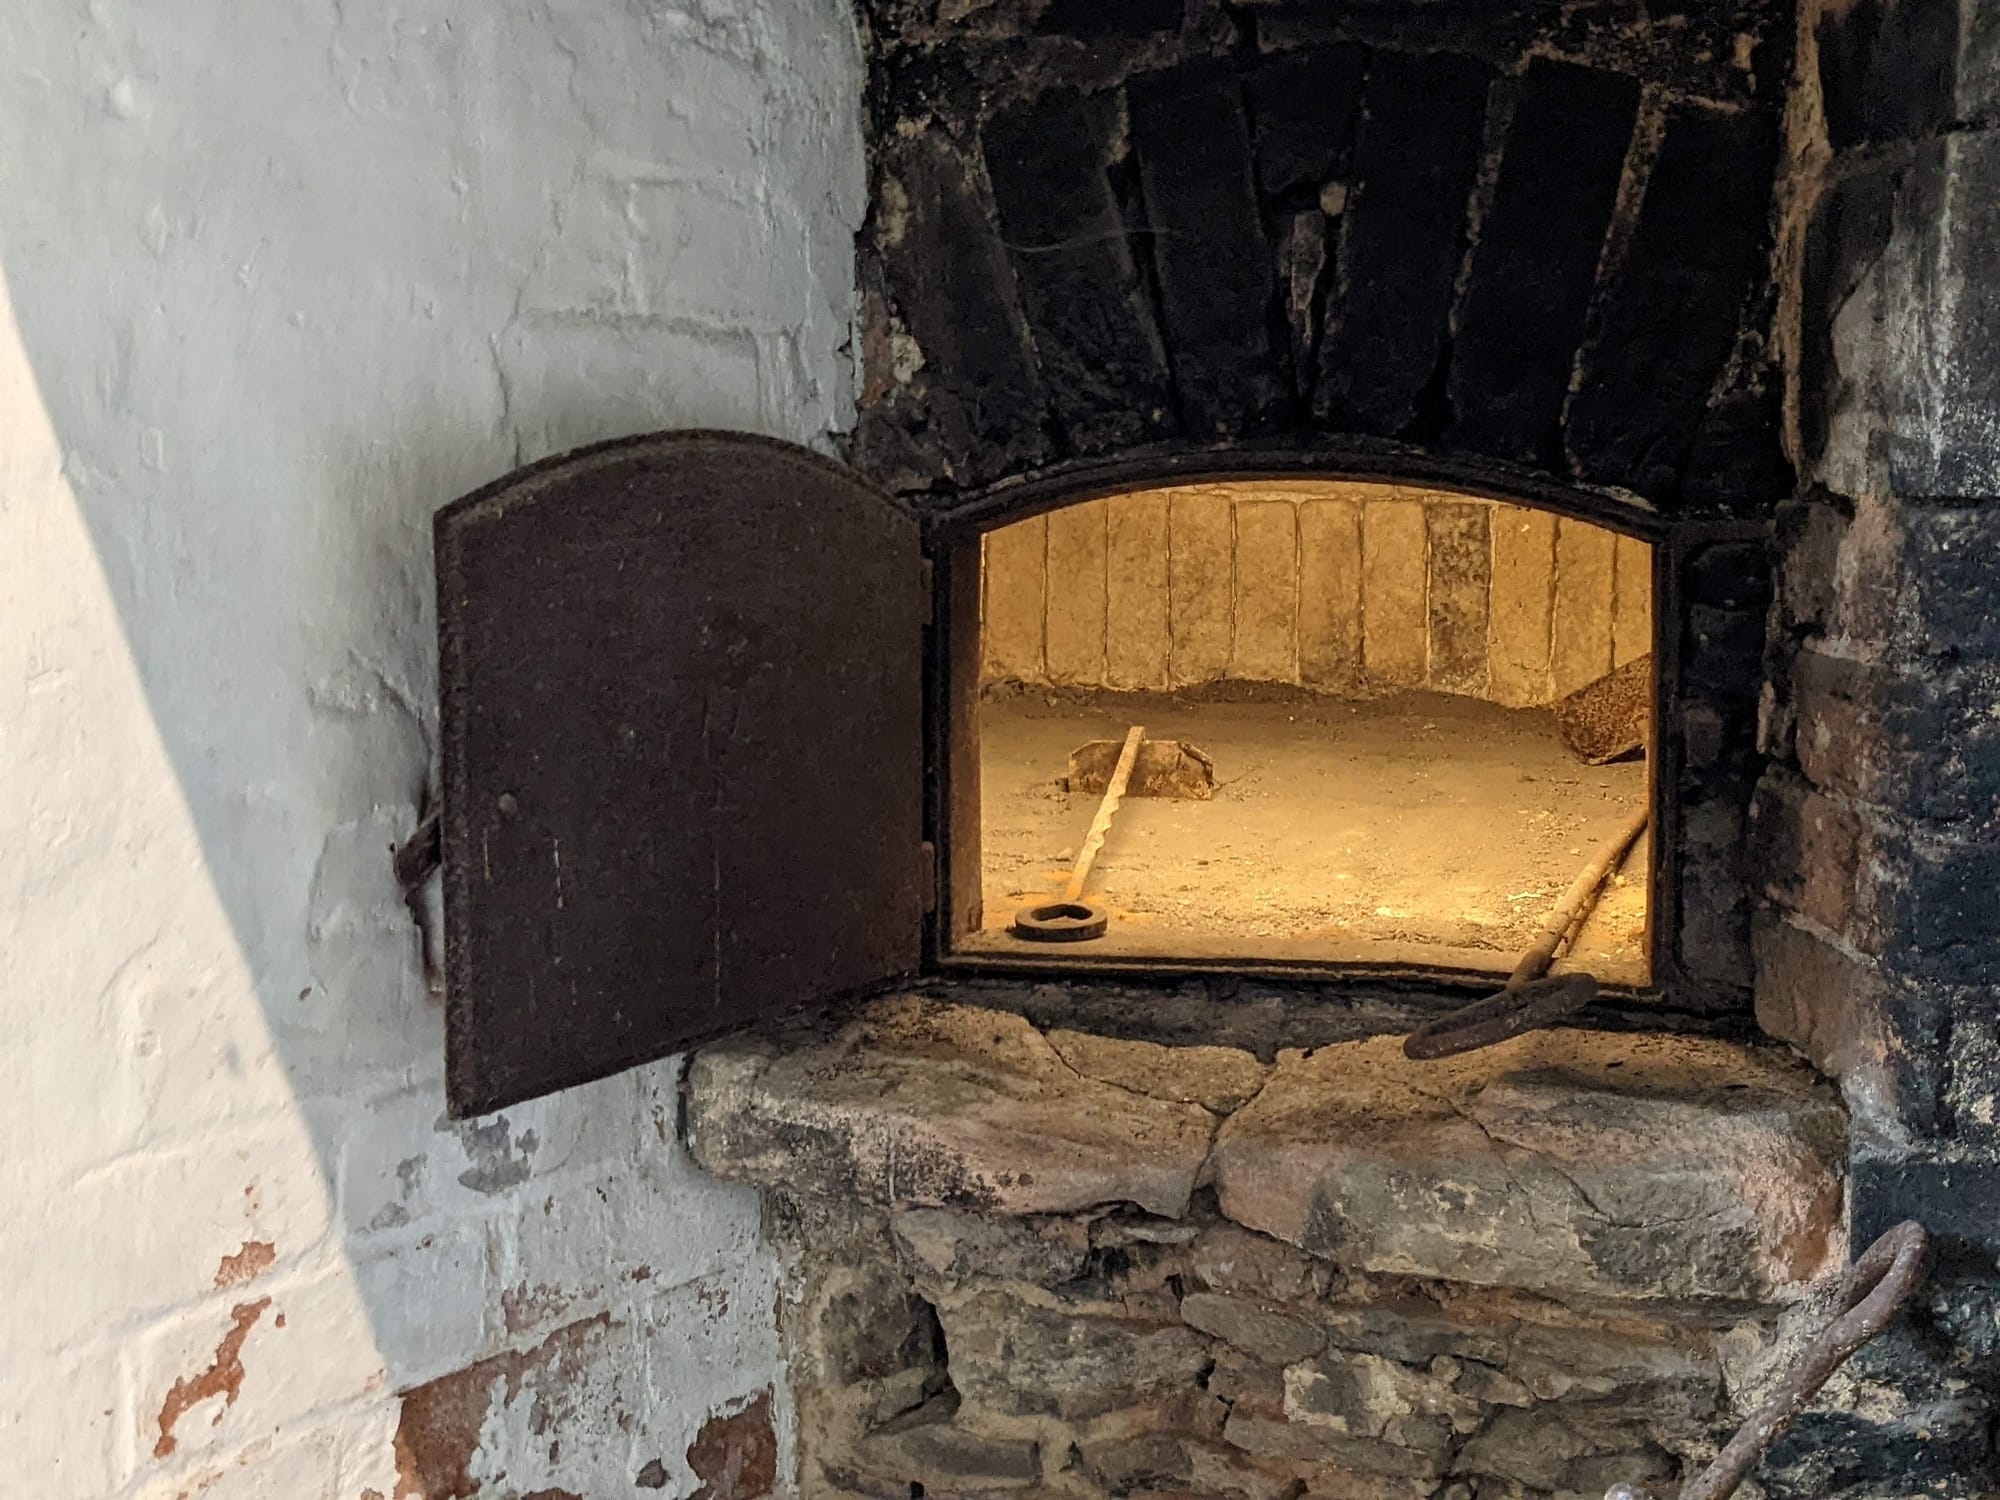 baking oven at Kelsmcott Manor Brewhouse